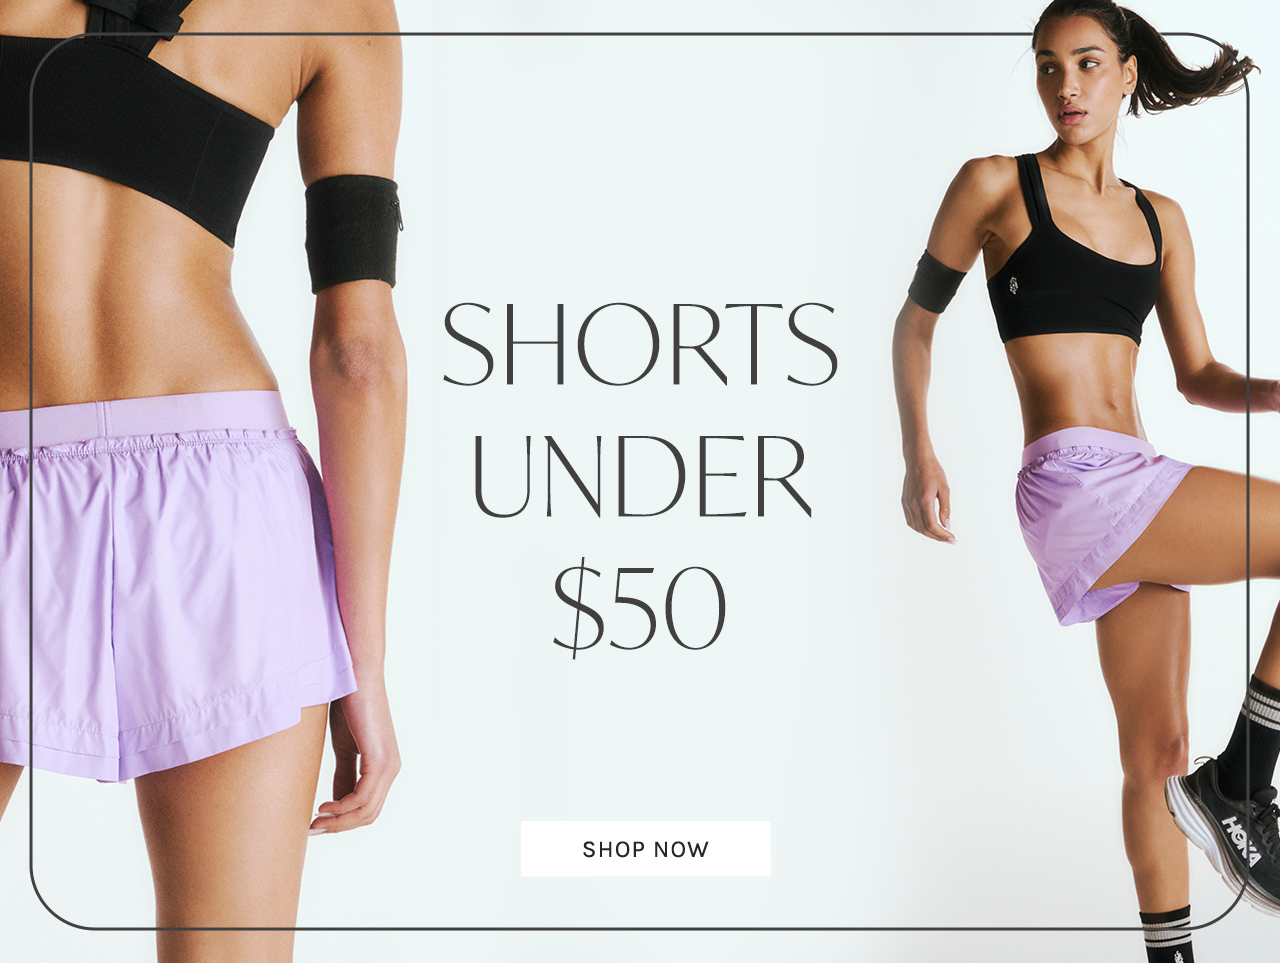 Women's Cute Athletic Wear & Workout Outfits, Free People, Free People